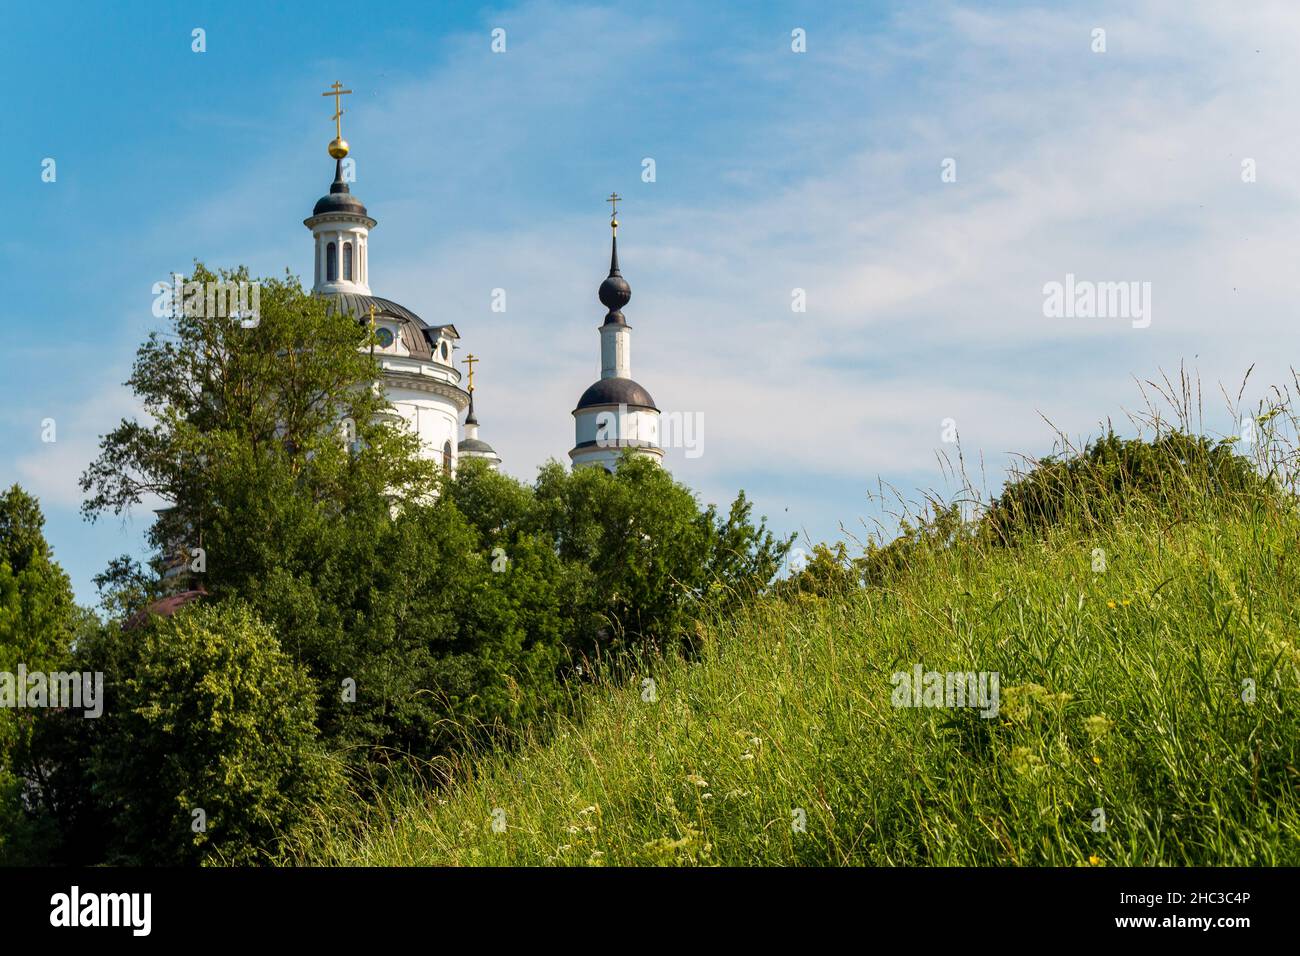 View of the Russian Orthodox Cathedral behind a hill overgrown with green grass. Maloyaroslavets, Russia Stock Photo